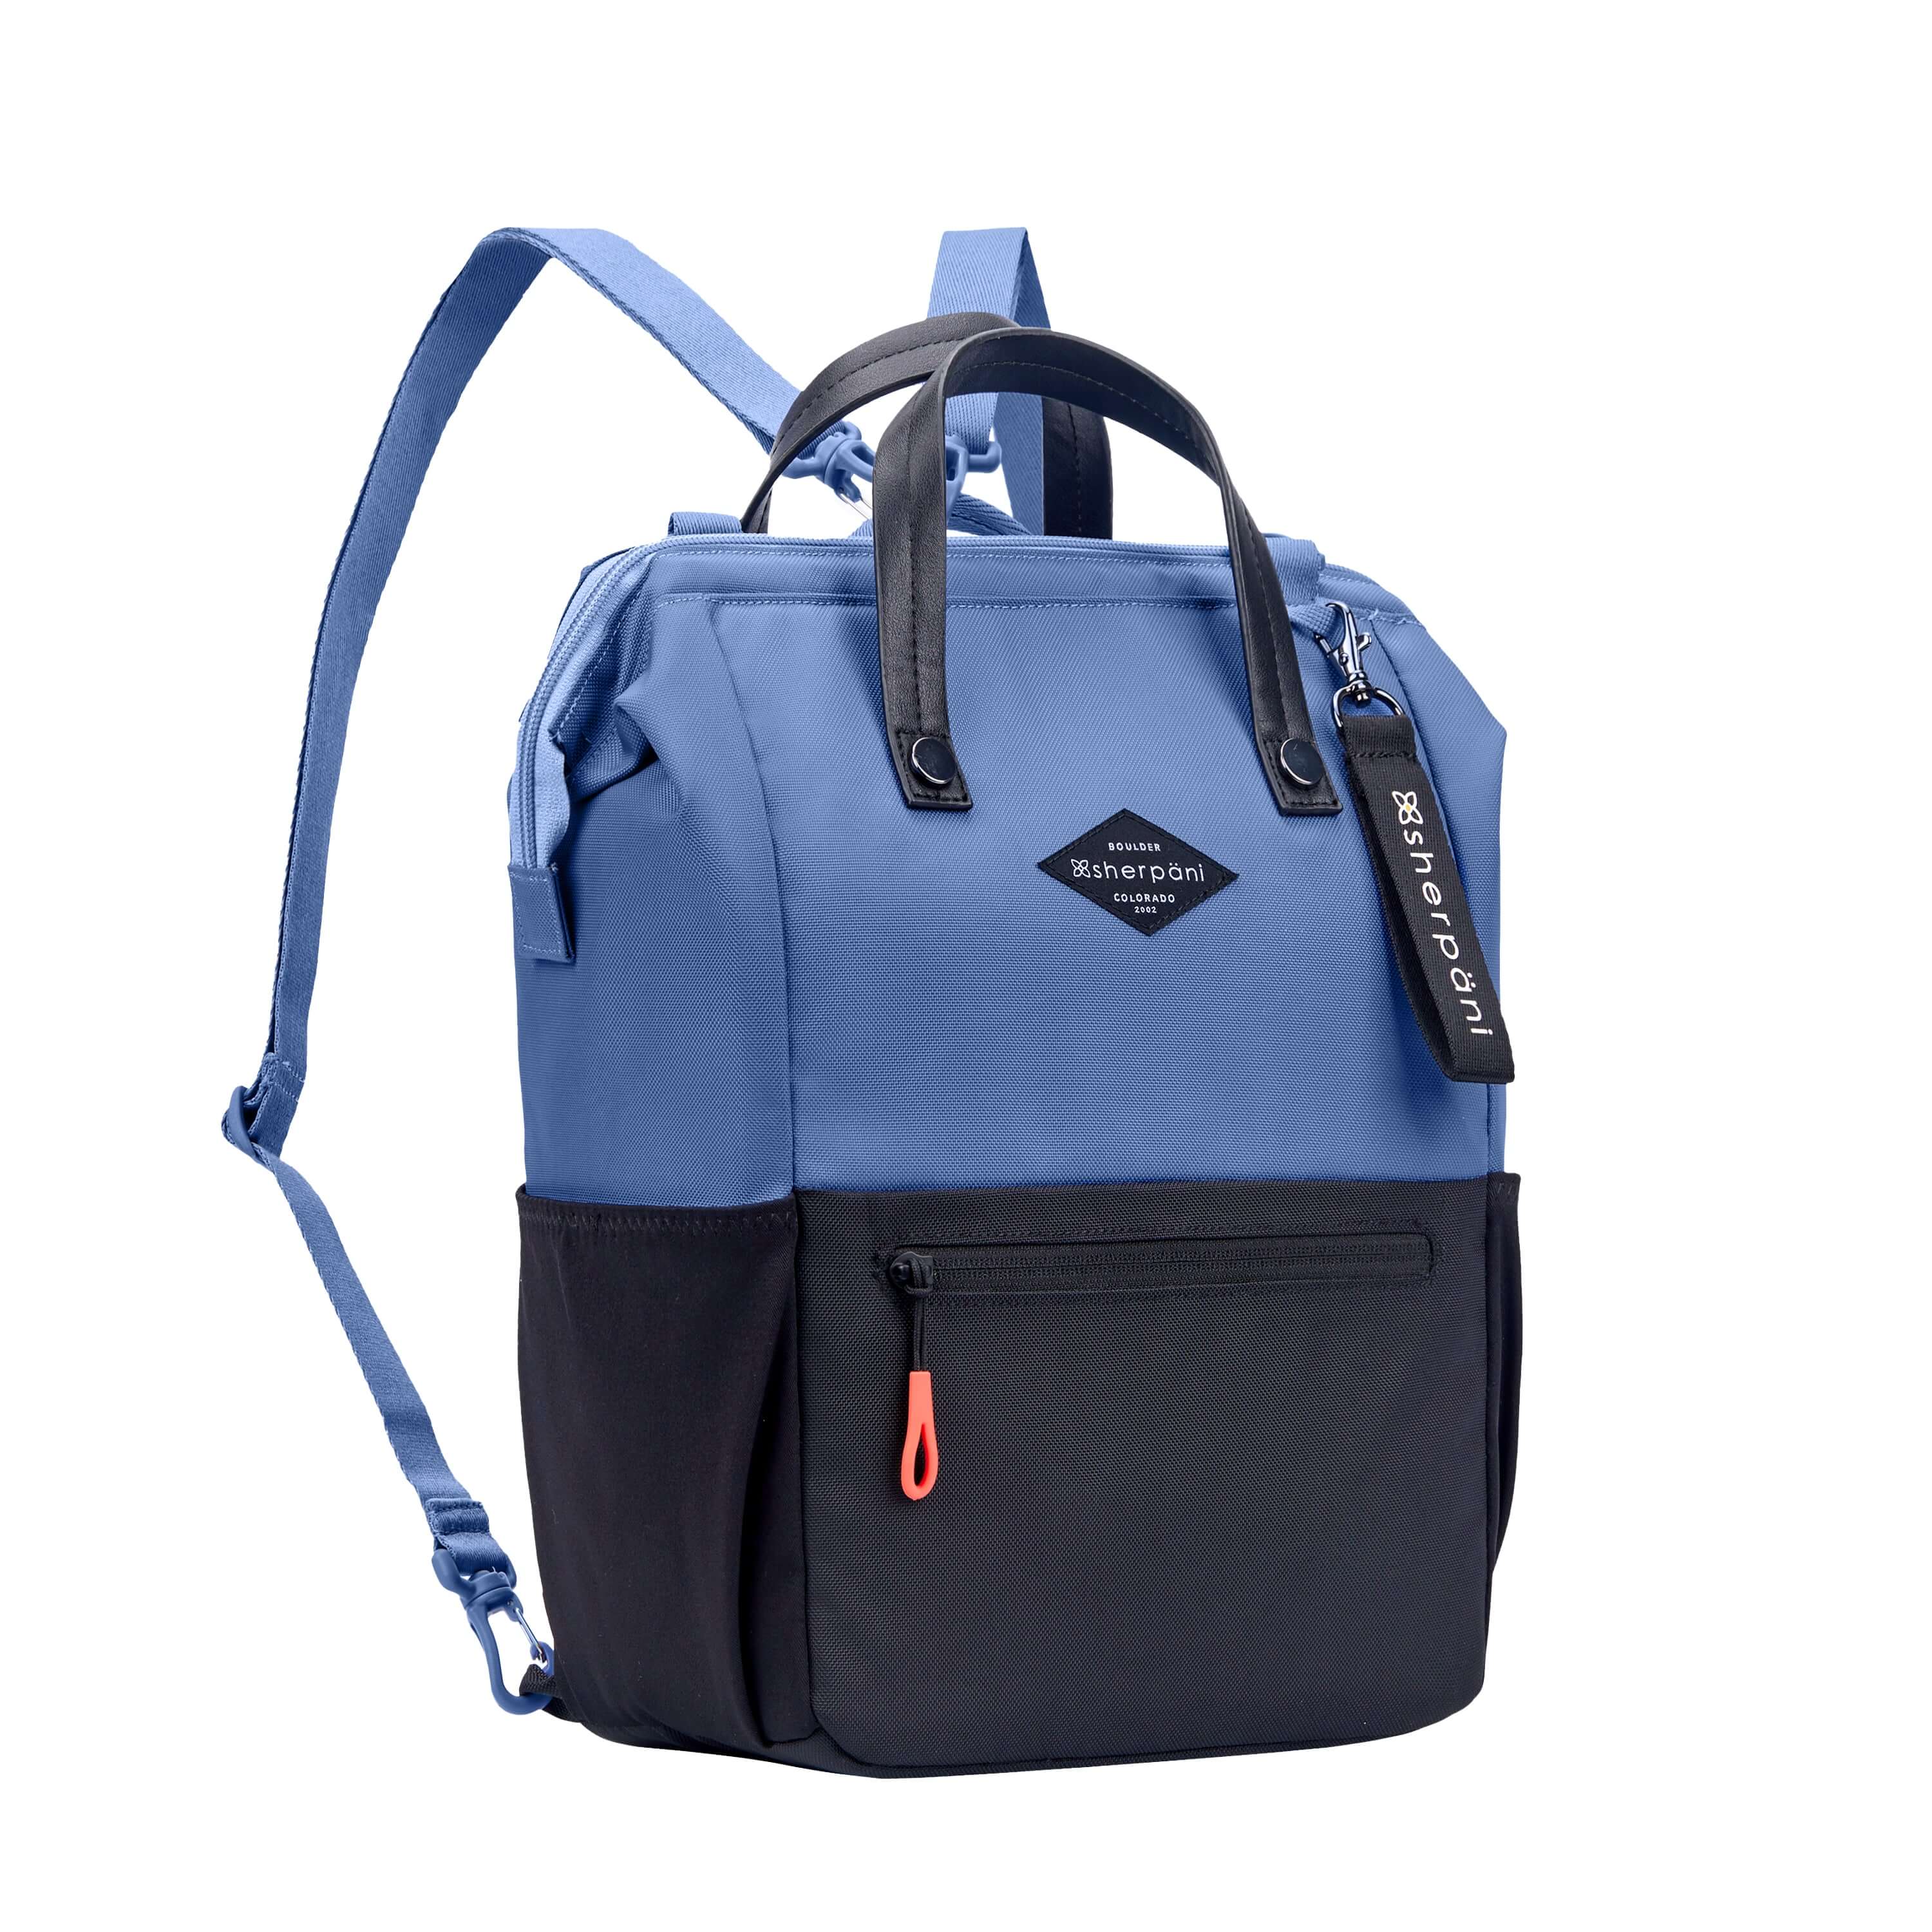 Angled front view of Sherpani three in one bag, the Dispatch in Pacific Blue. The bag is two toned: the top is ocean blue and the bottom is black. There is an external zipper pocket on the front panel. Easy pull zippers are accented in red. A branded Sherpani keychain is clipped to the upper right corner. Elastic water bottle holders sit on either side of the bag. It has short tote handles and adjustable/detachable straps that can function for a backpack or crossbody. #color_pacific blue